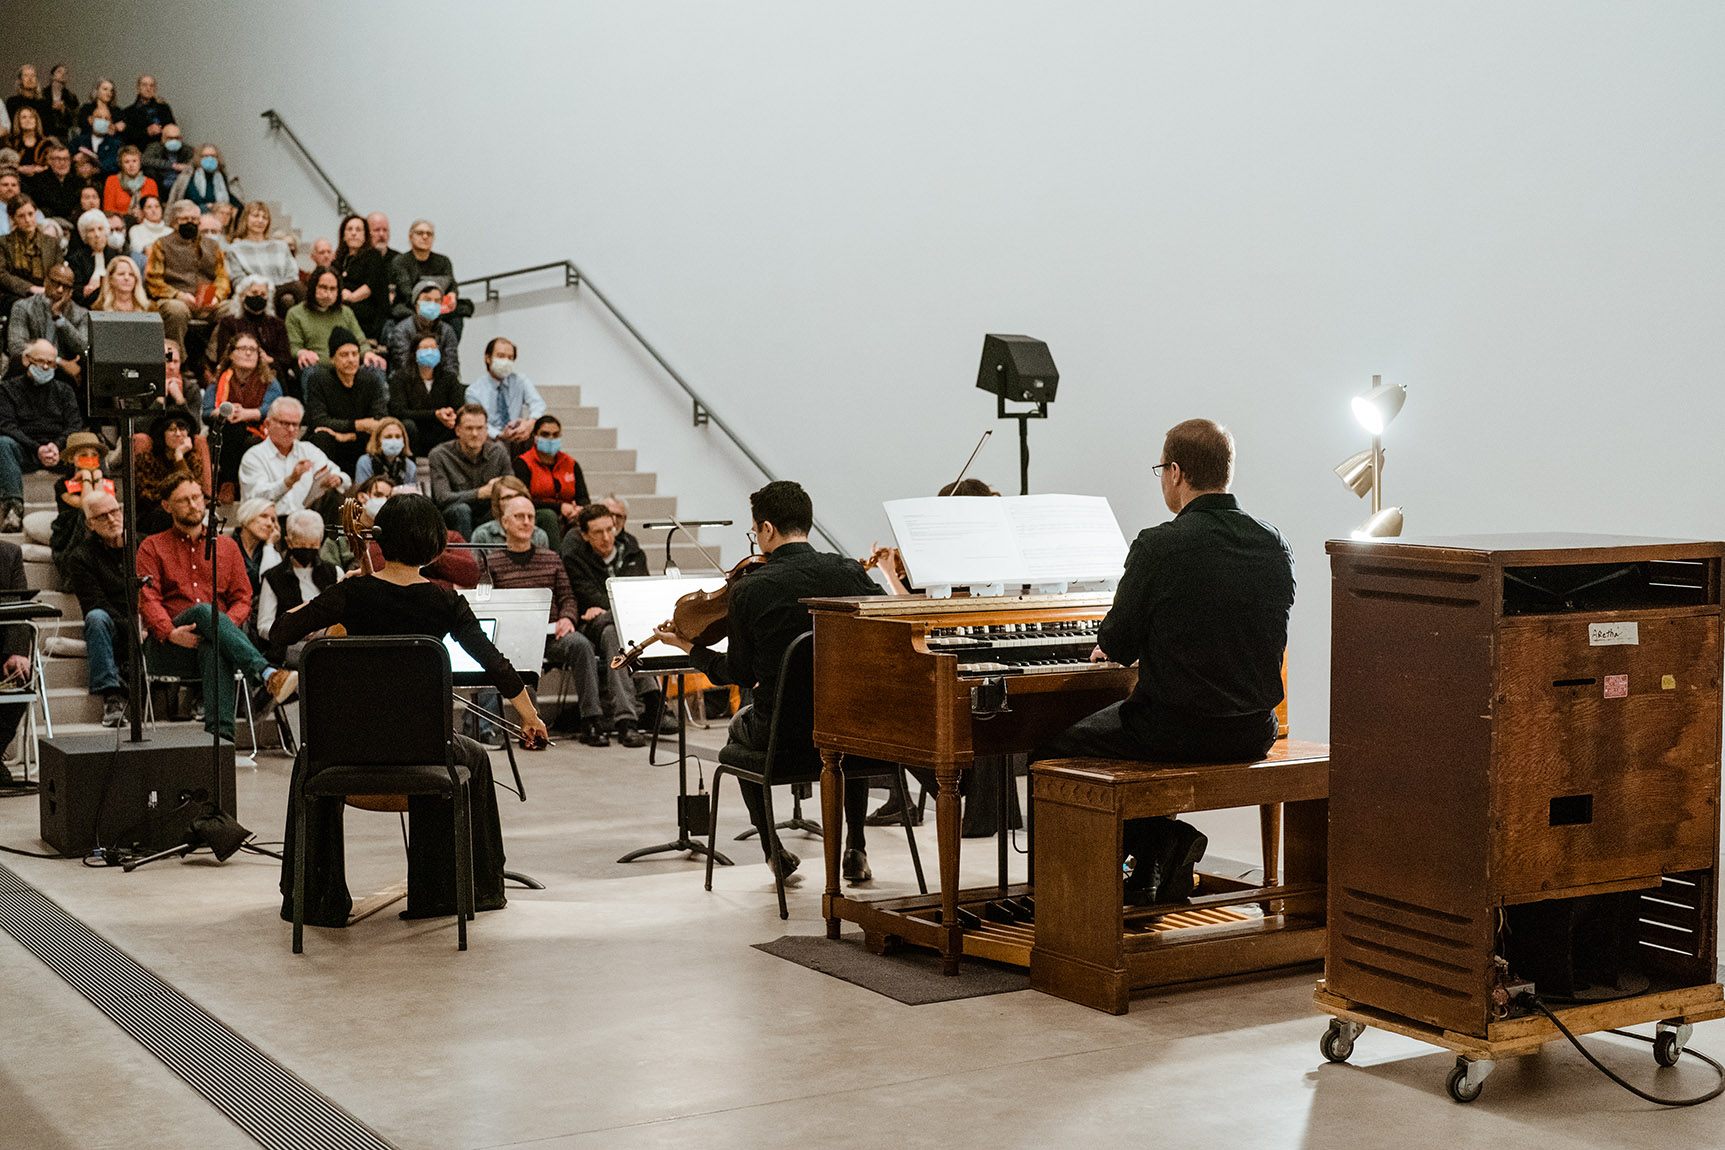 St. Louis Symphony Orchestra performing at the Pulitzer Arts Foundation